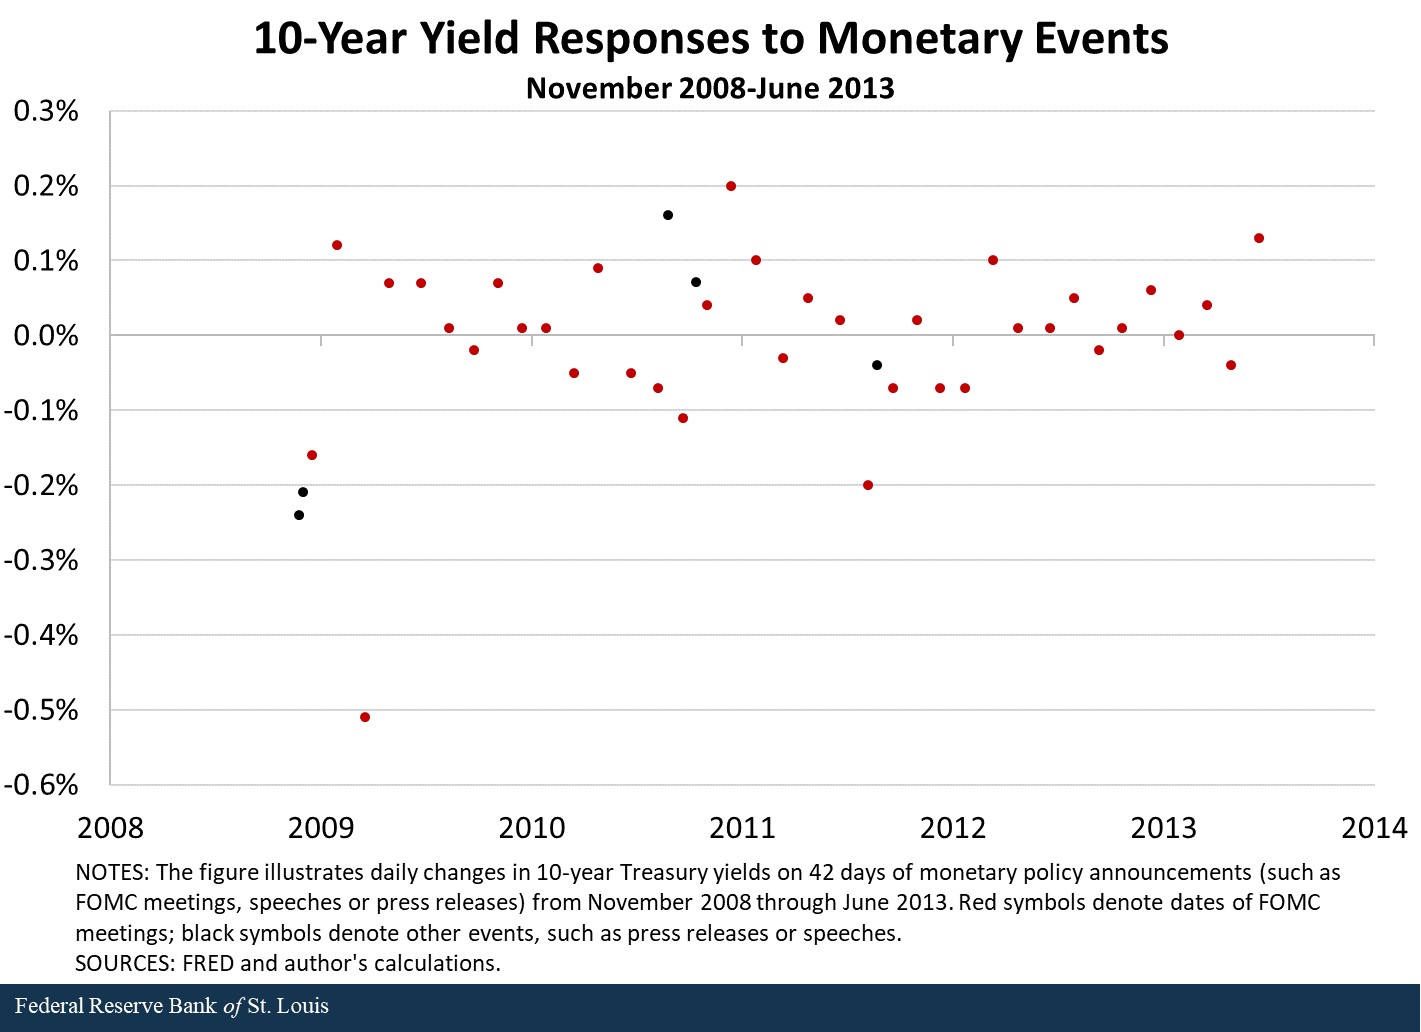 Scatter plot illustrating daily changes in 10-year Treasury yields on 42 days of monetary policy announcements from November 2008-June 2013